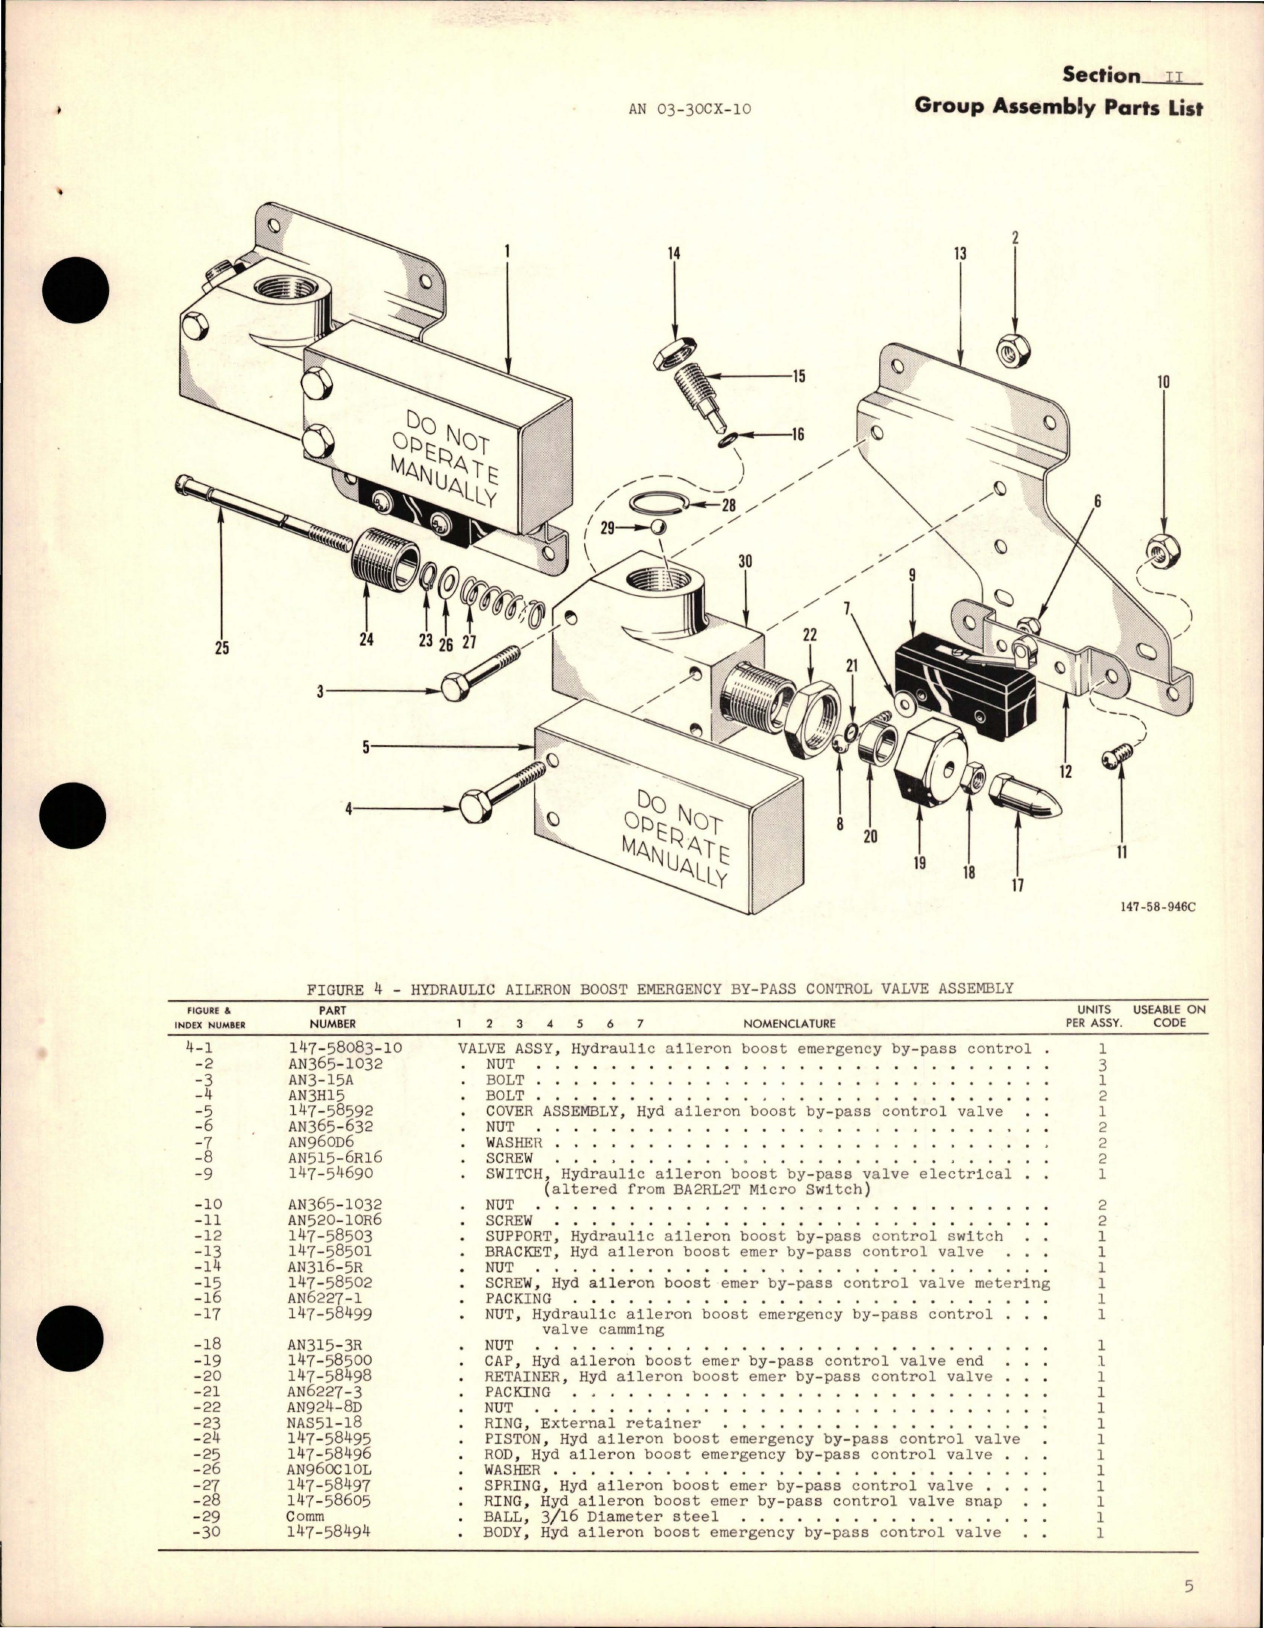 Sample page 7 from AirCorps Library document: Illustrated Parts Breakdown for Selector, By-Pass, and Shut Off Hydraulic Valves 